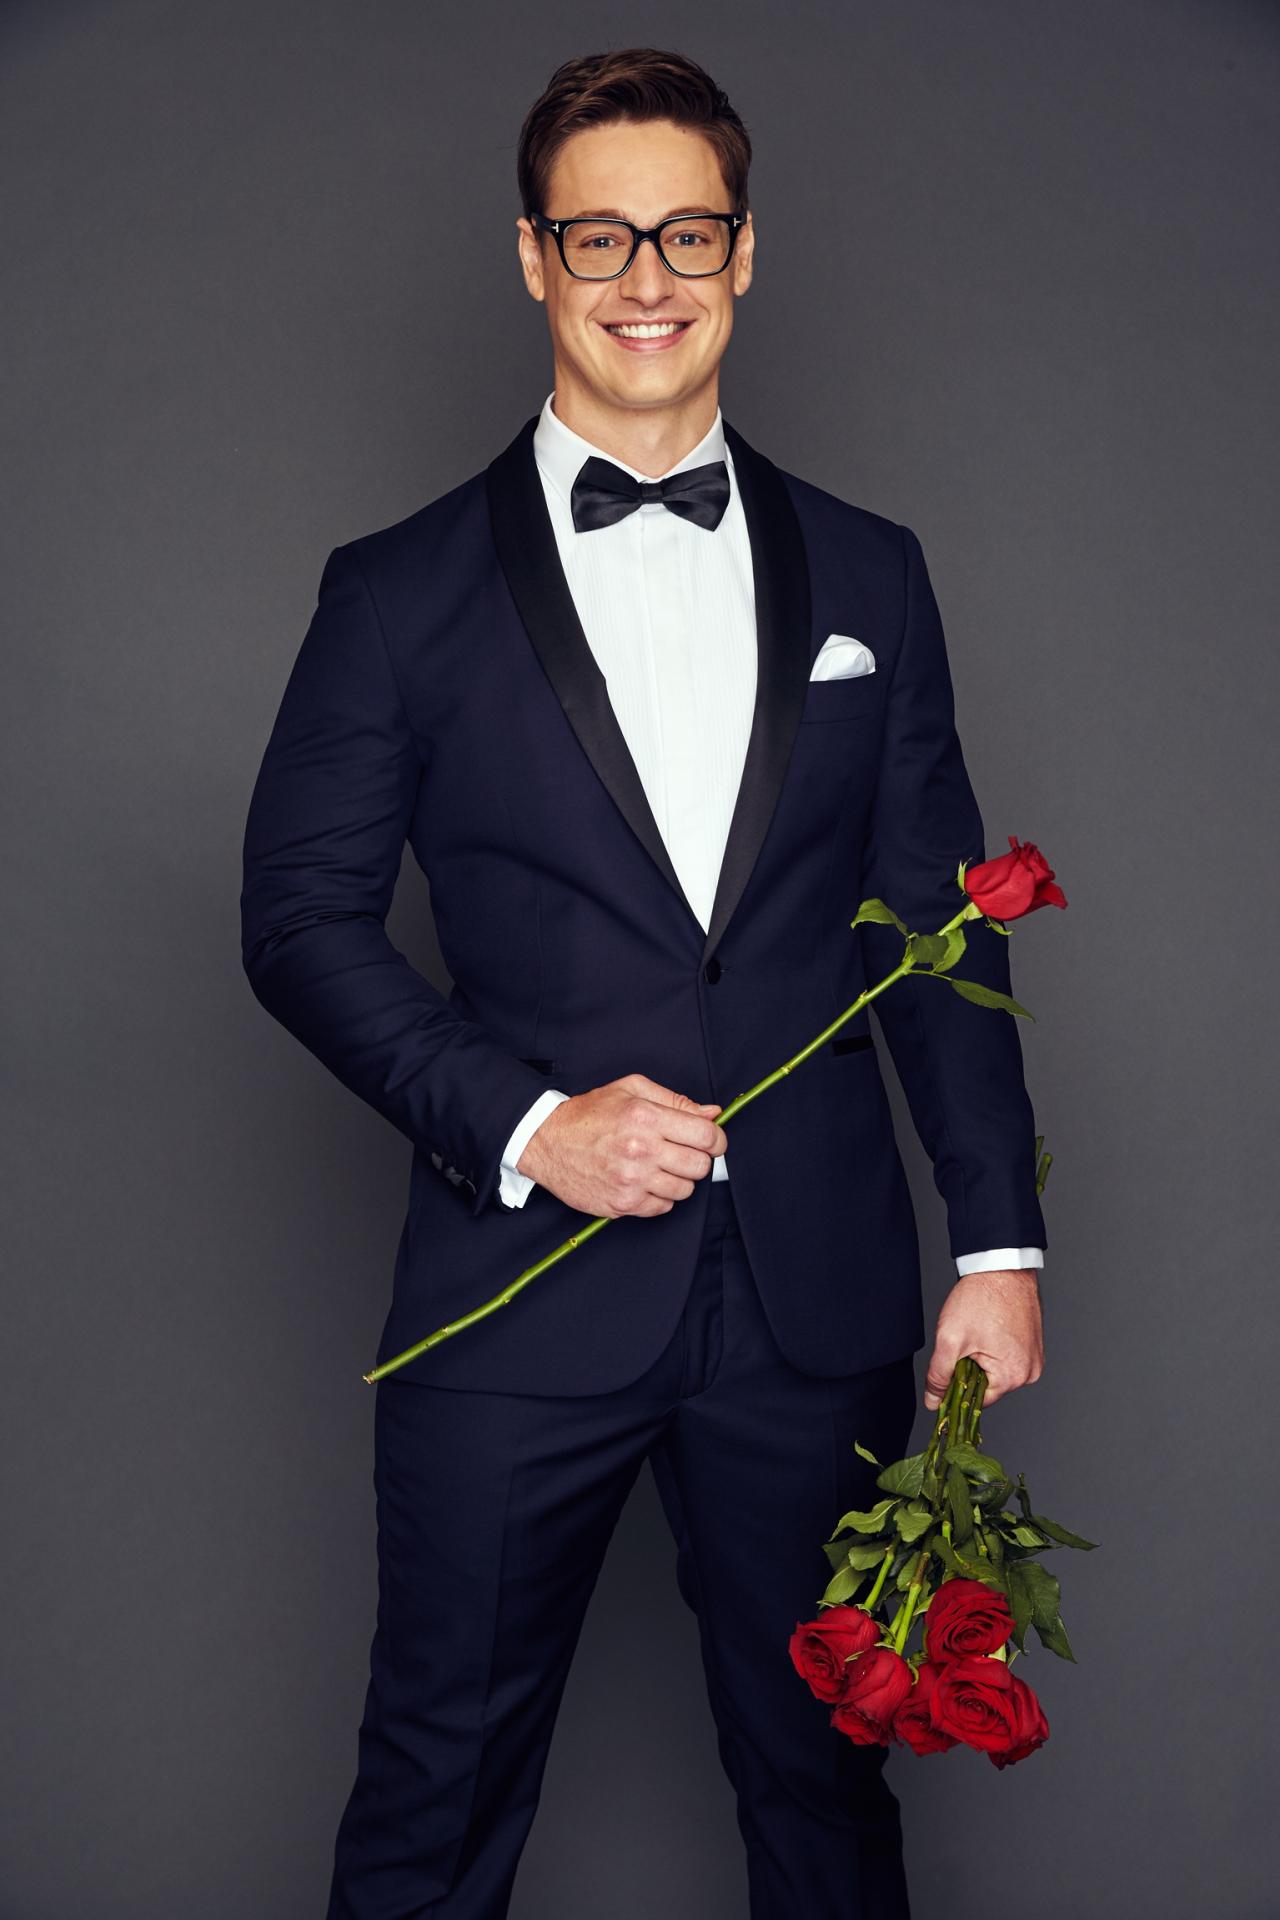 Everything you need to know about Australia's new Bachelor, The